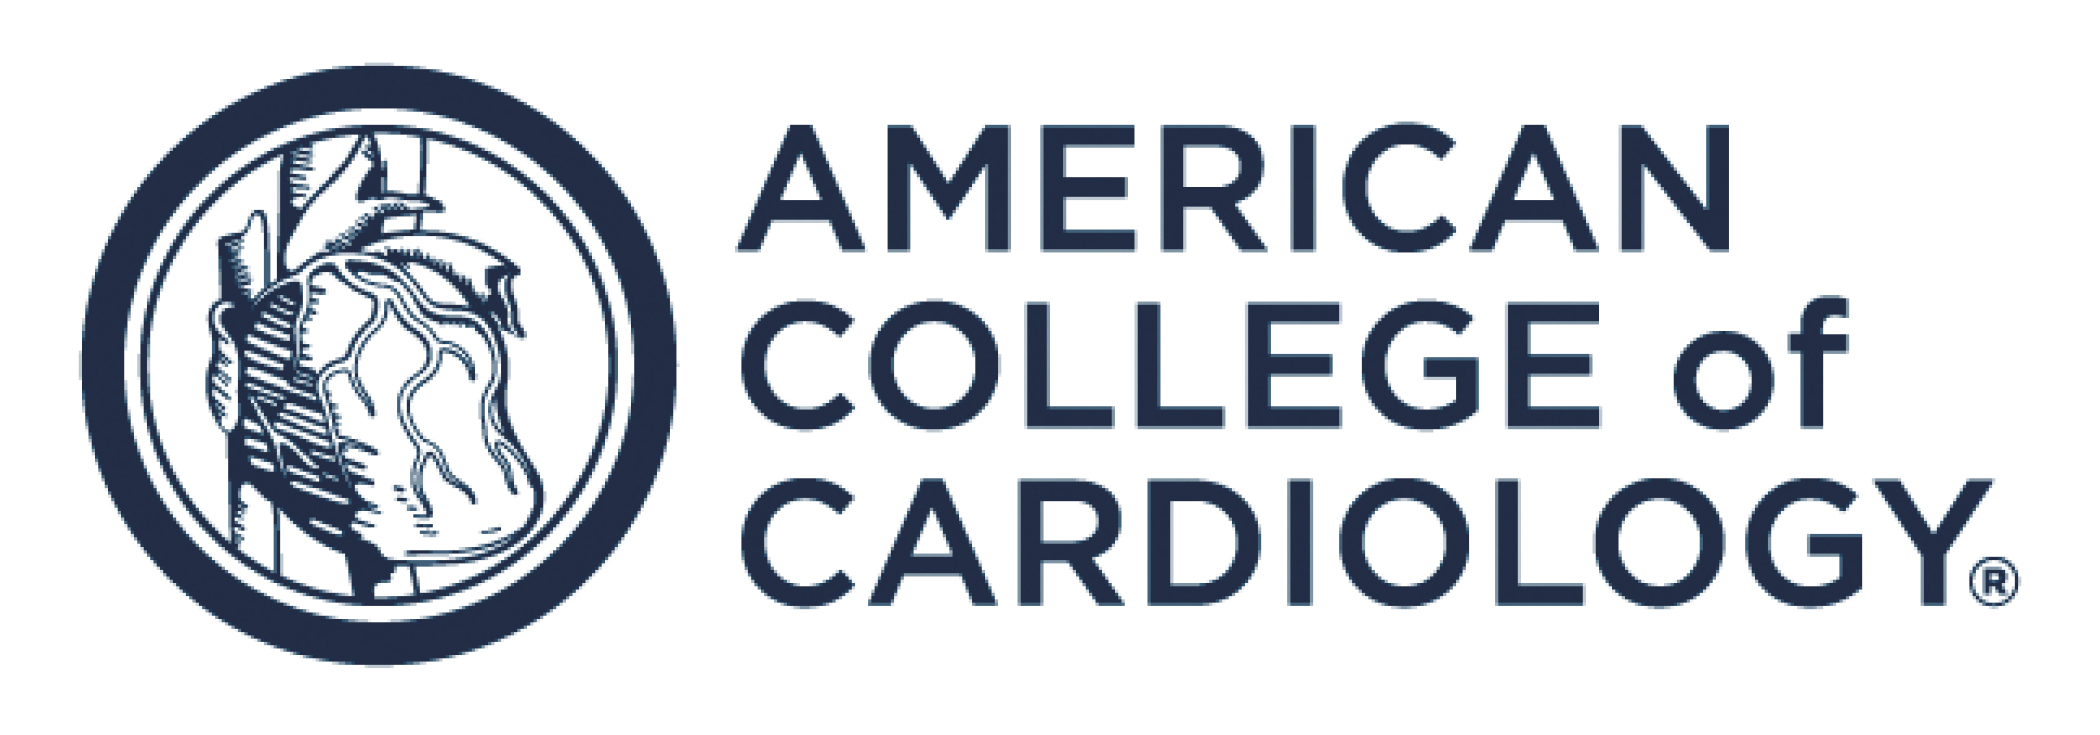 American College of Cardiology creates the Valentín Fuster Award for Innovation in Science